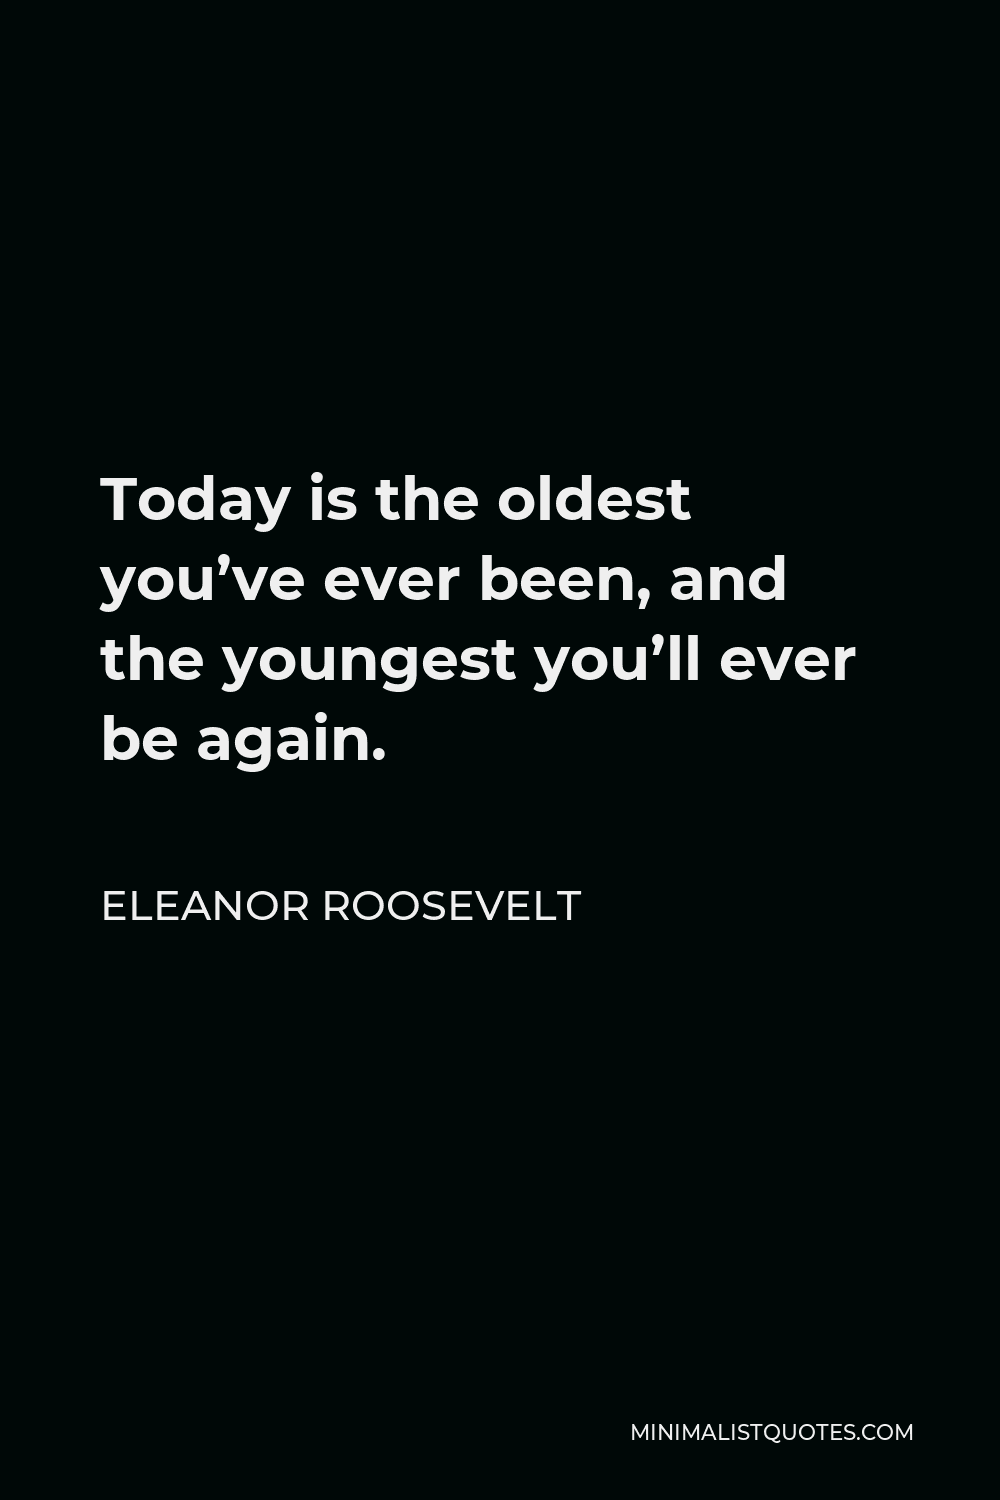 Eleanor Roosevelt Quote - Today is the oldest you’ve ever been, and the youngest you’ll ever be again.